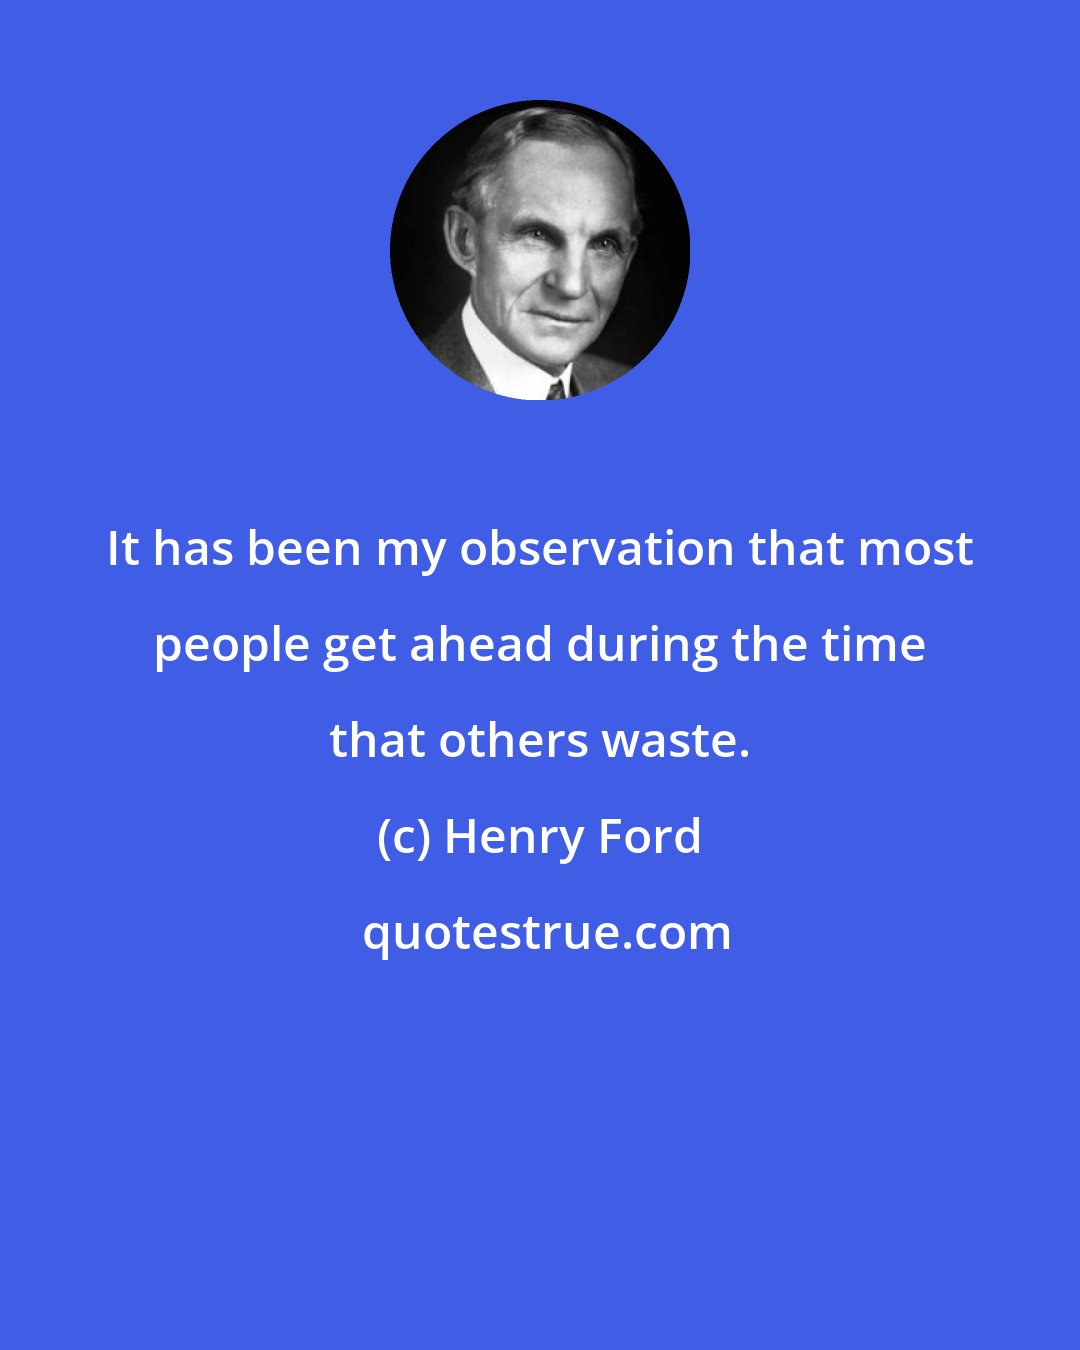 Henry Ford: It has been my observation that most people get ahead during the time that others waste.